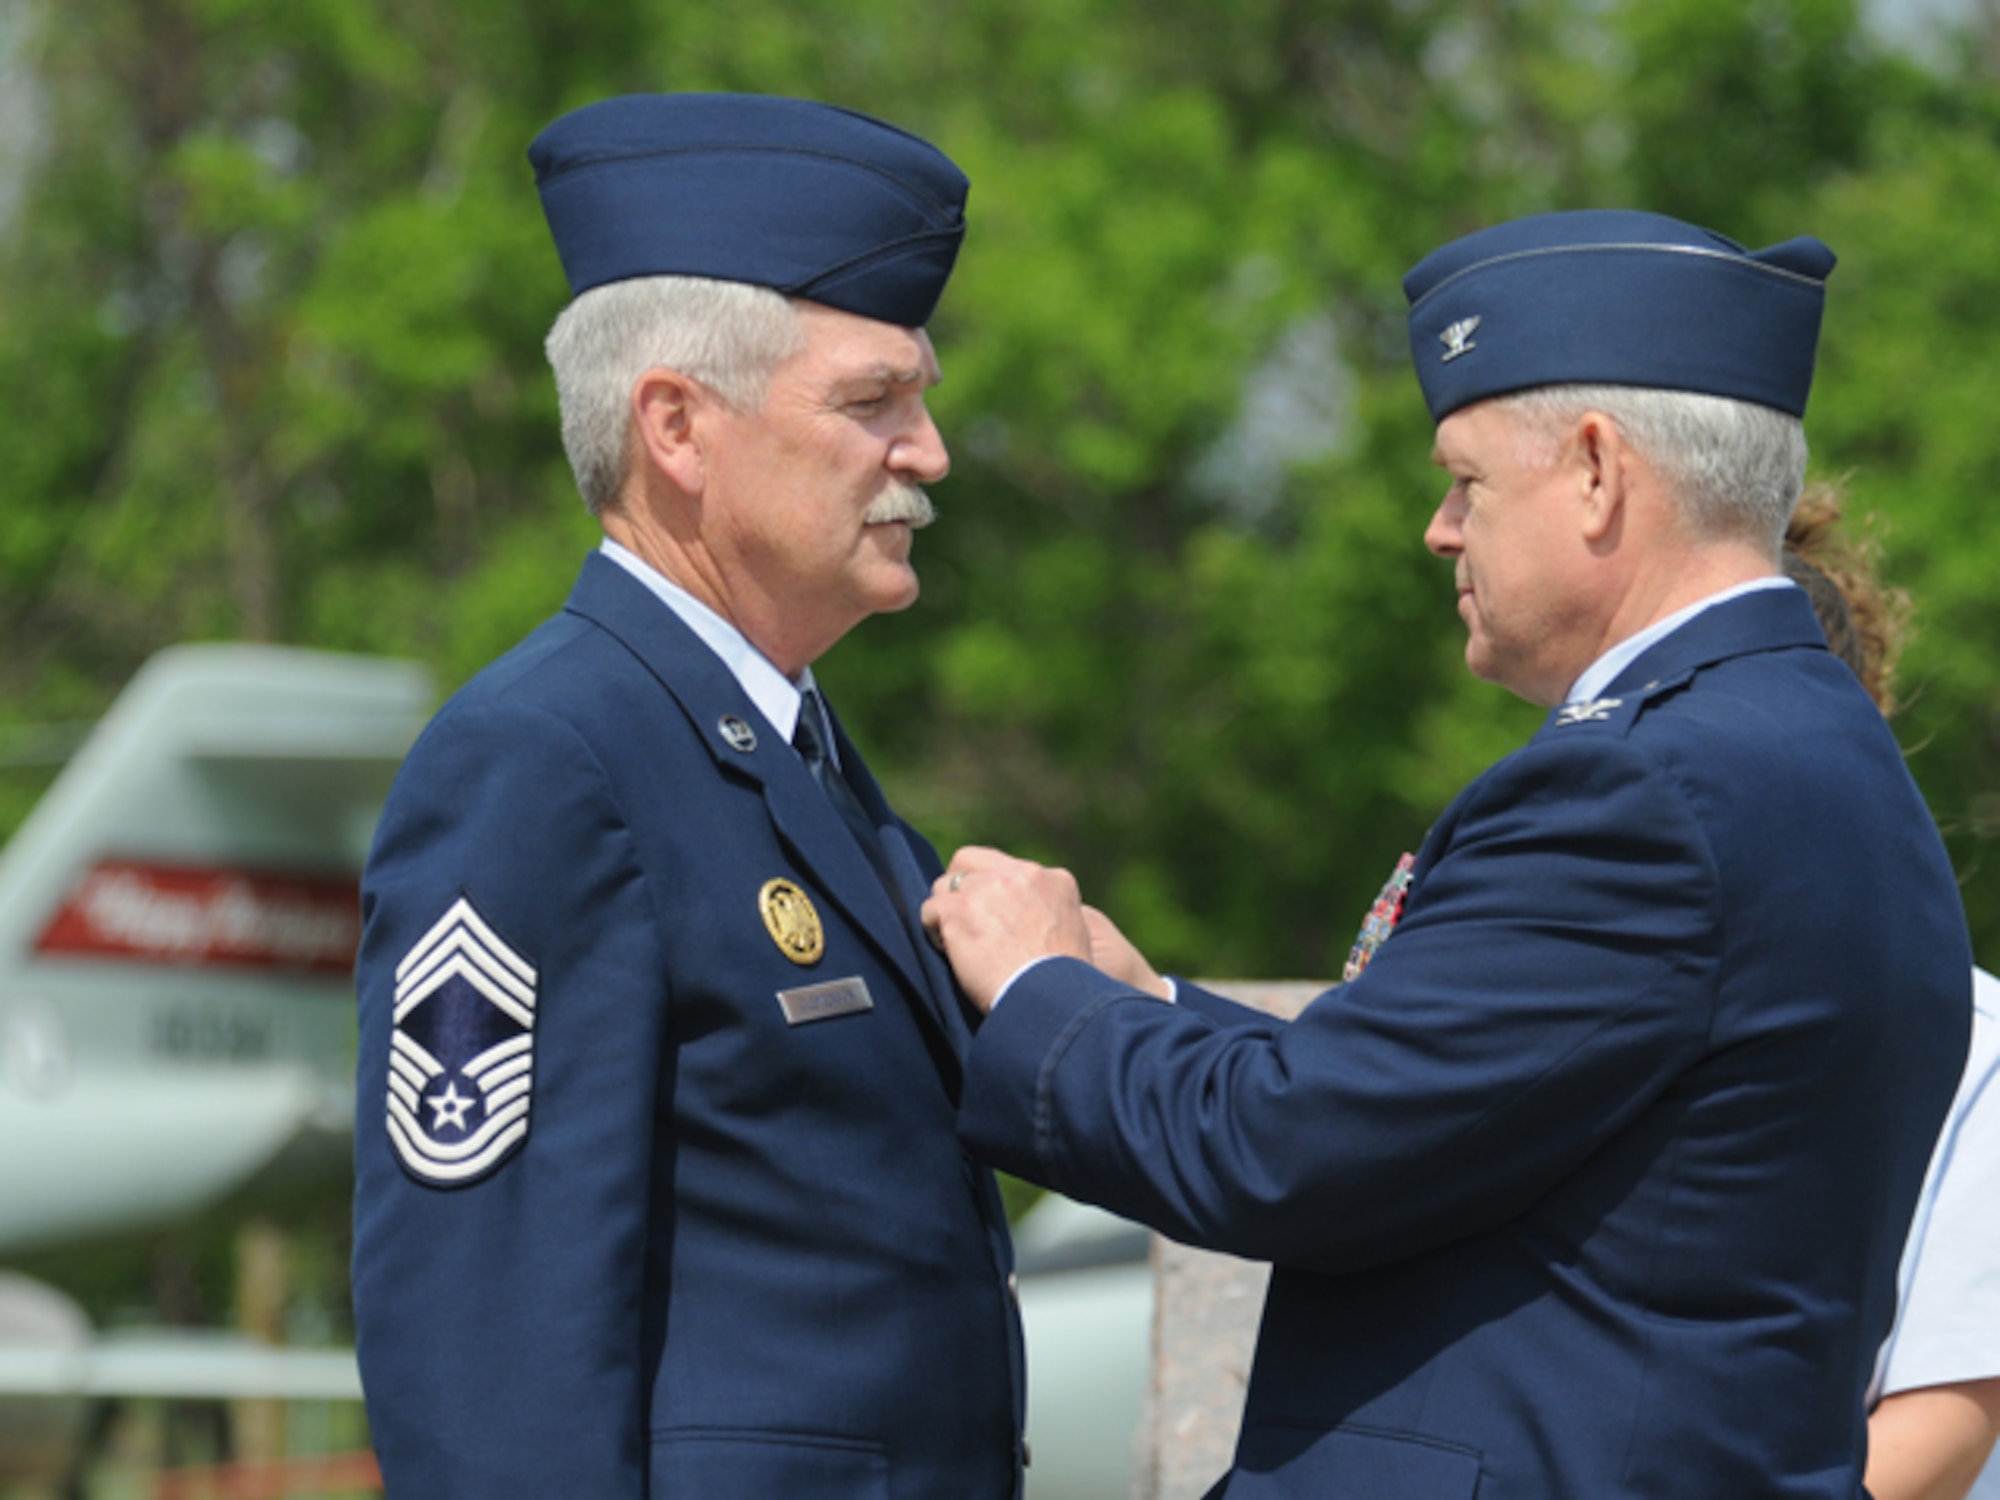 Col. Michael Wobbema, the North Dakota National Guard director of joint staff and assistant adjutant general for air, pins the Defense Meritorious Service Medal onto the jacket of Chief Master Sgt. James Clemenson, left, June 4, during Clemenson's retirement ceremony at the North Dakota Air National Guard, Fargo, N.D. Clemenson is the last enlisted Airman to have been stationed in Vietnam to retire from the Air Force.  Clemenson did two tours in Vietnam with the U.S. Army from October 1970 through April 1972. He joined the North Dakota Air National Guard in 1973 and has most recently served as the National Guard Bureau senior enlisted manager for the joint staff, Washington, D.C. He has served in the United States military for 41 years. Only one other active Airman, Chief Master Sgt. Jim Honeycutt, still remains in service that wears a Vietnam Service Ribbon, although it's for temporary duty in country versus a mobilization. Clemenson and Honeycutt's status is among active-duty Airmen and does not include drill status Guardsmen, on which no clear statistics were available.

